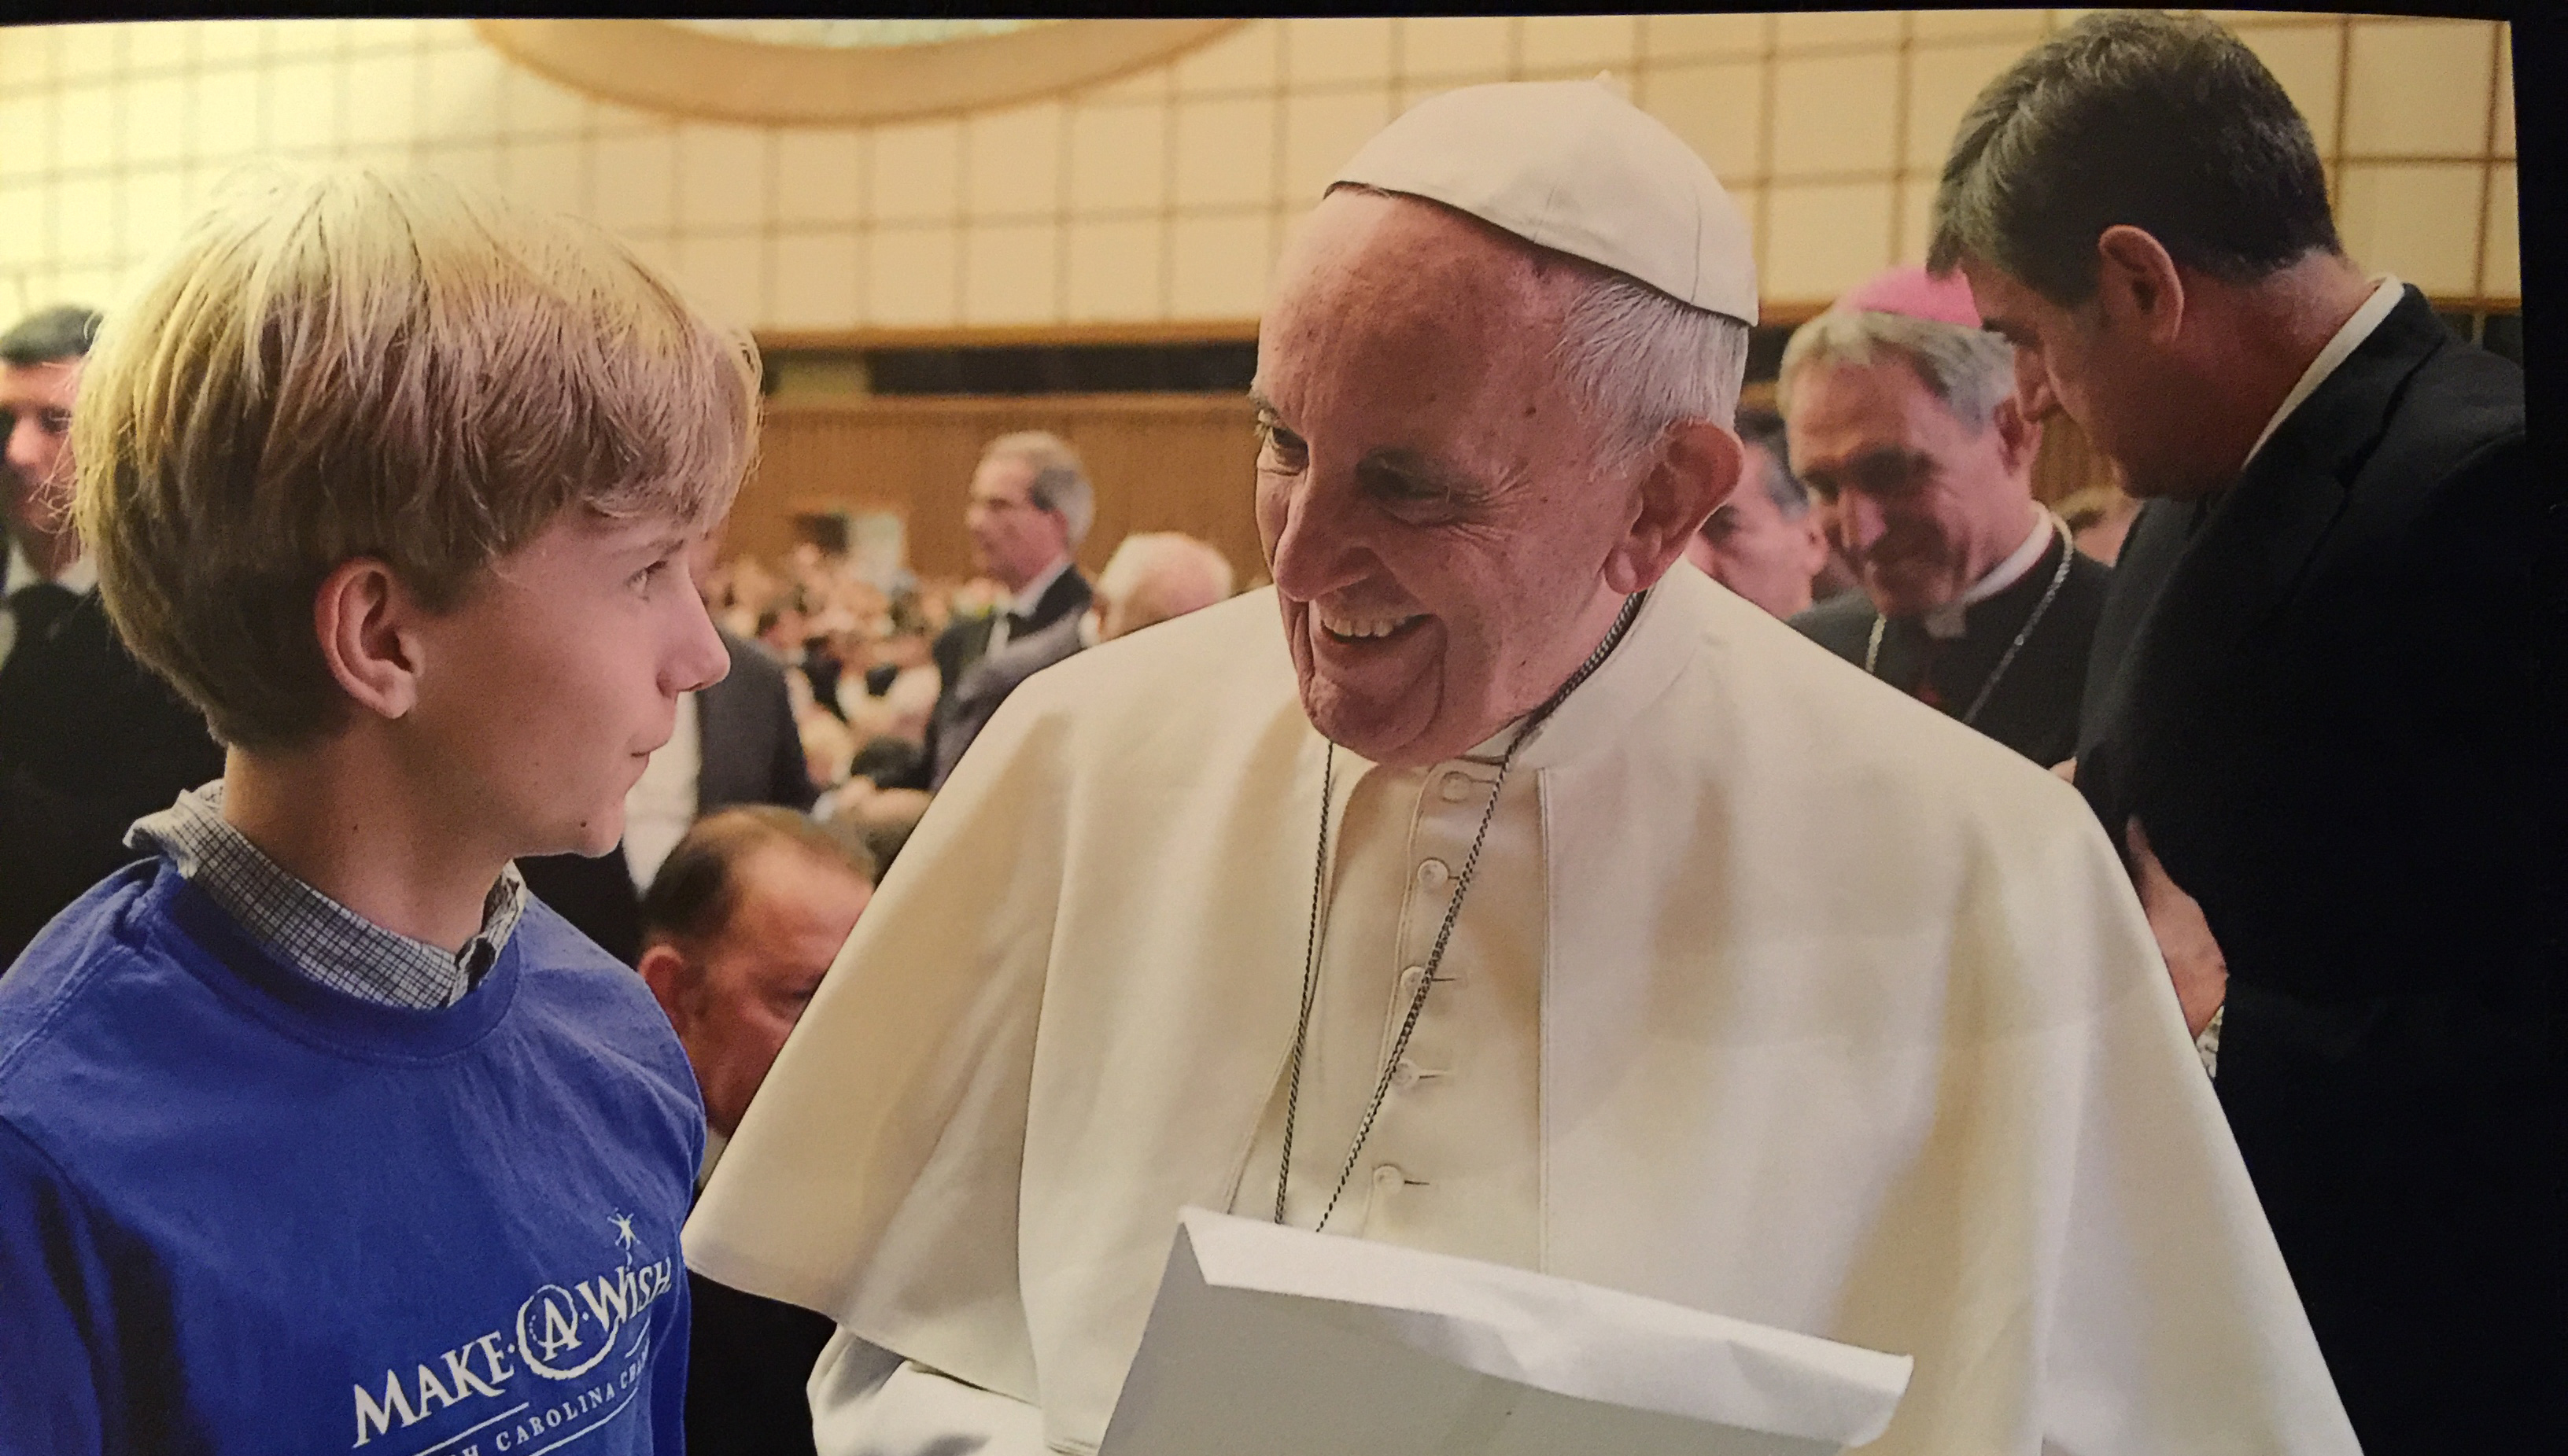 Tristan Searfoss, the son of Brian ’90 and Liisa (Duhigg) Searfoss ’90, meets Pope Francis at the Vatican in November 2016.